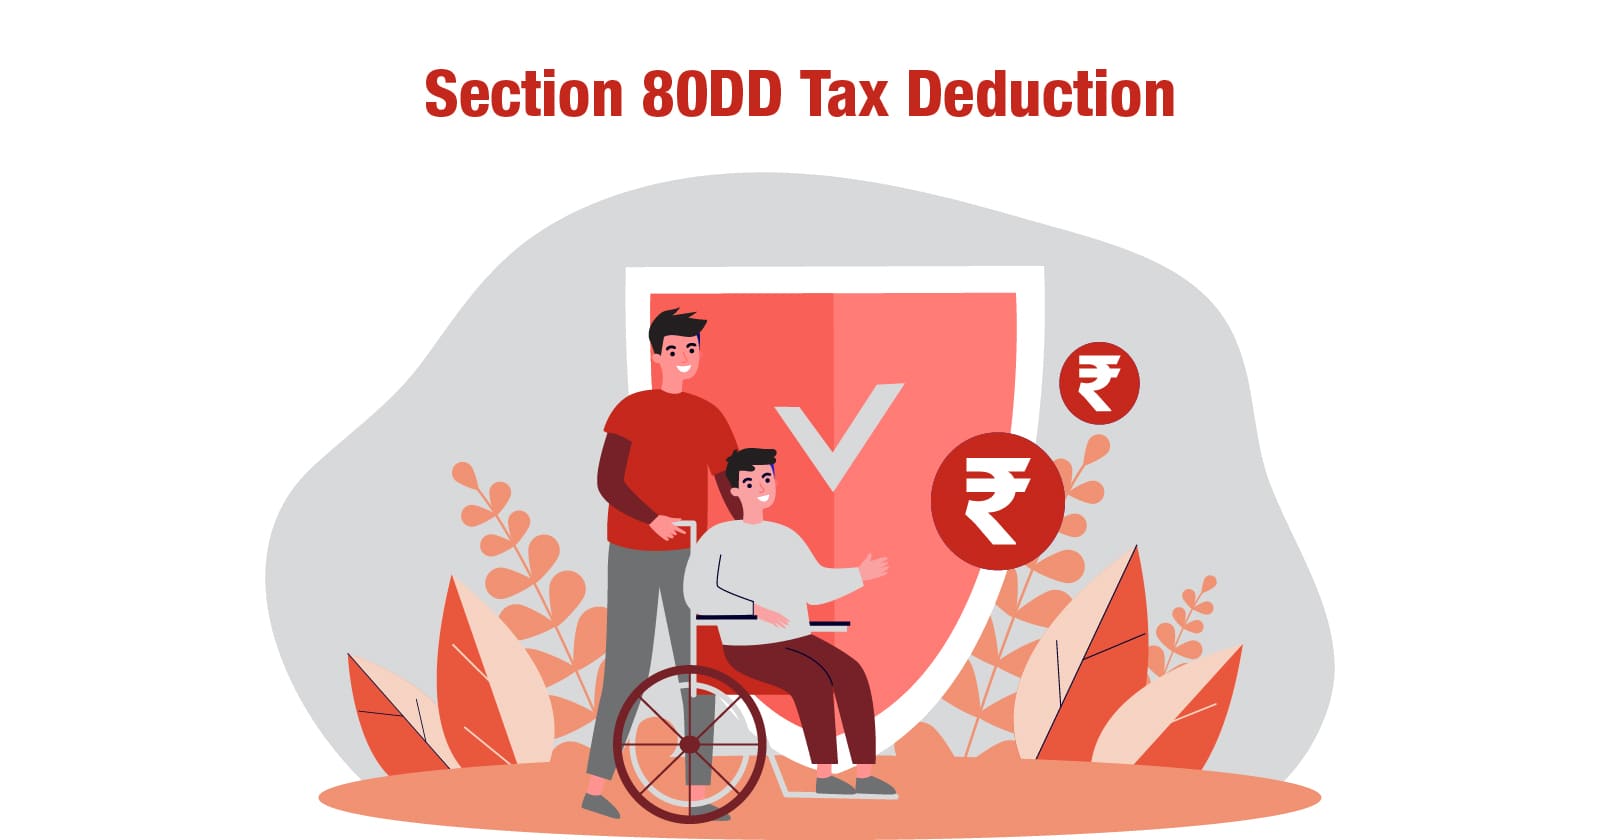 What Is Covered Under Section 80dd